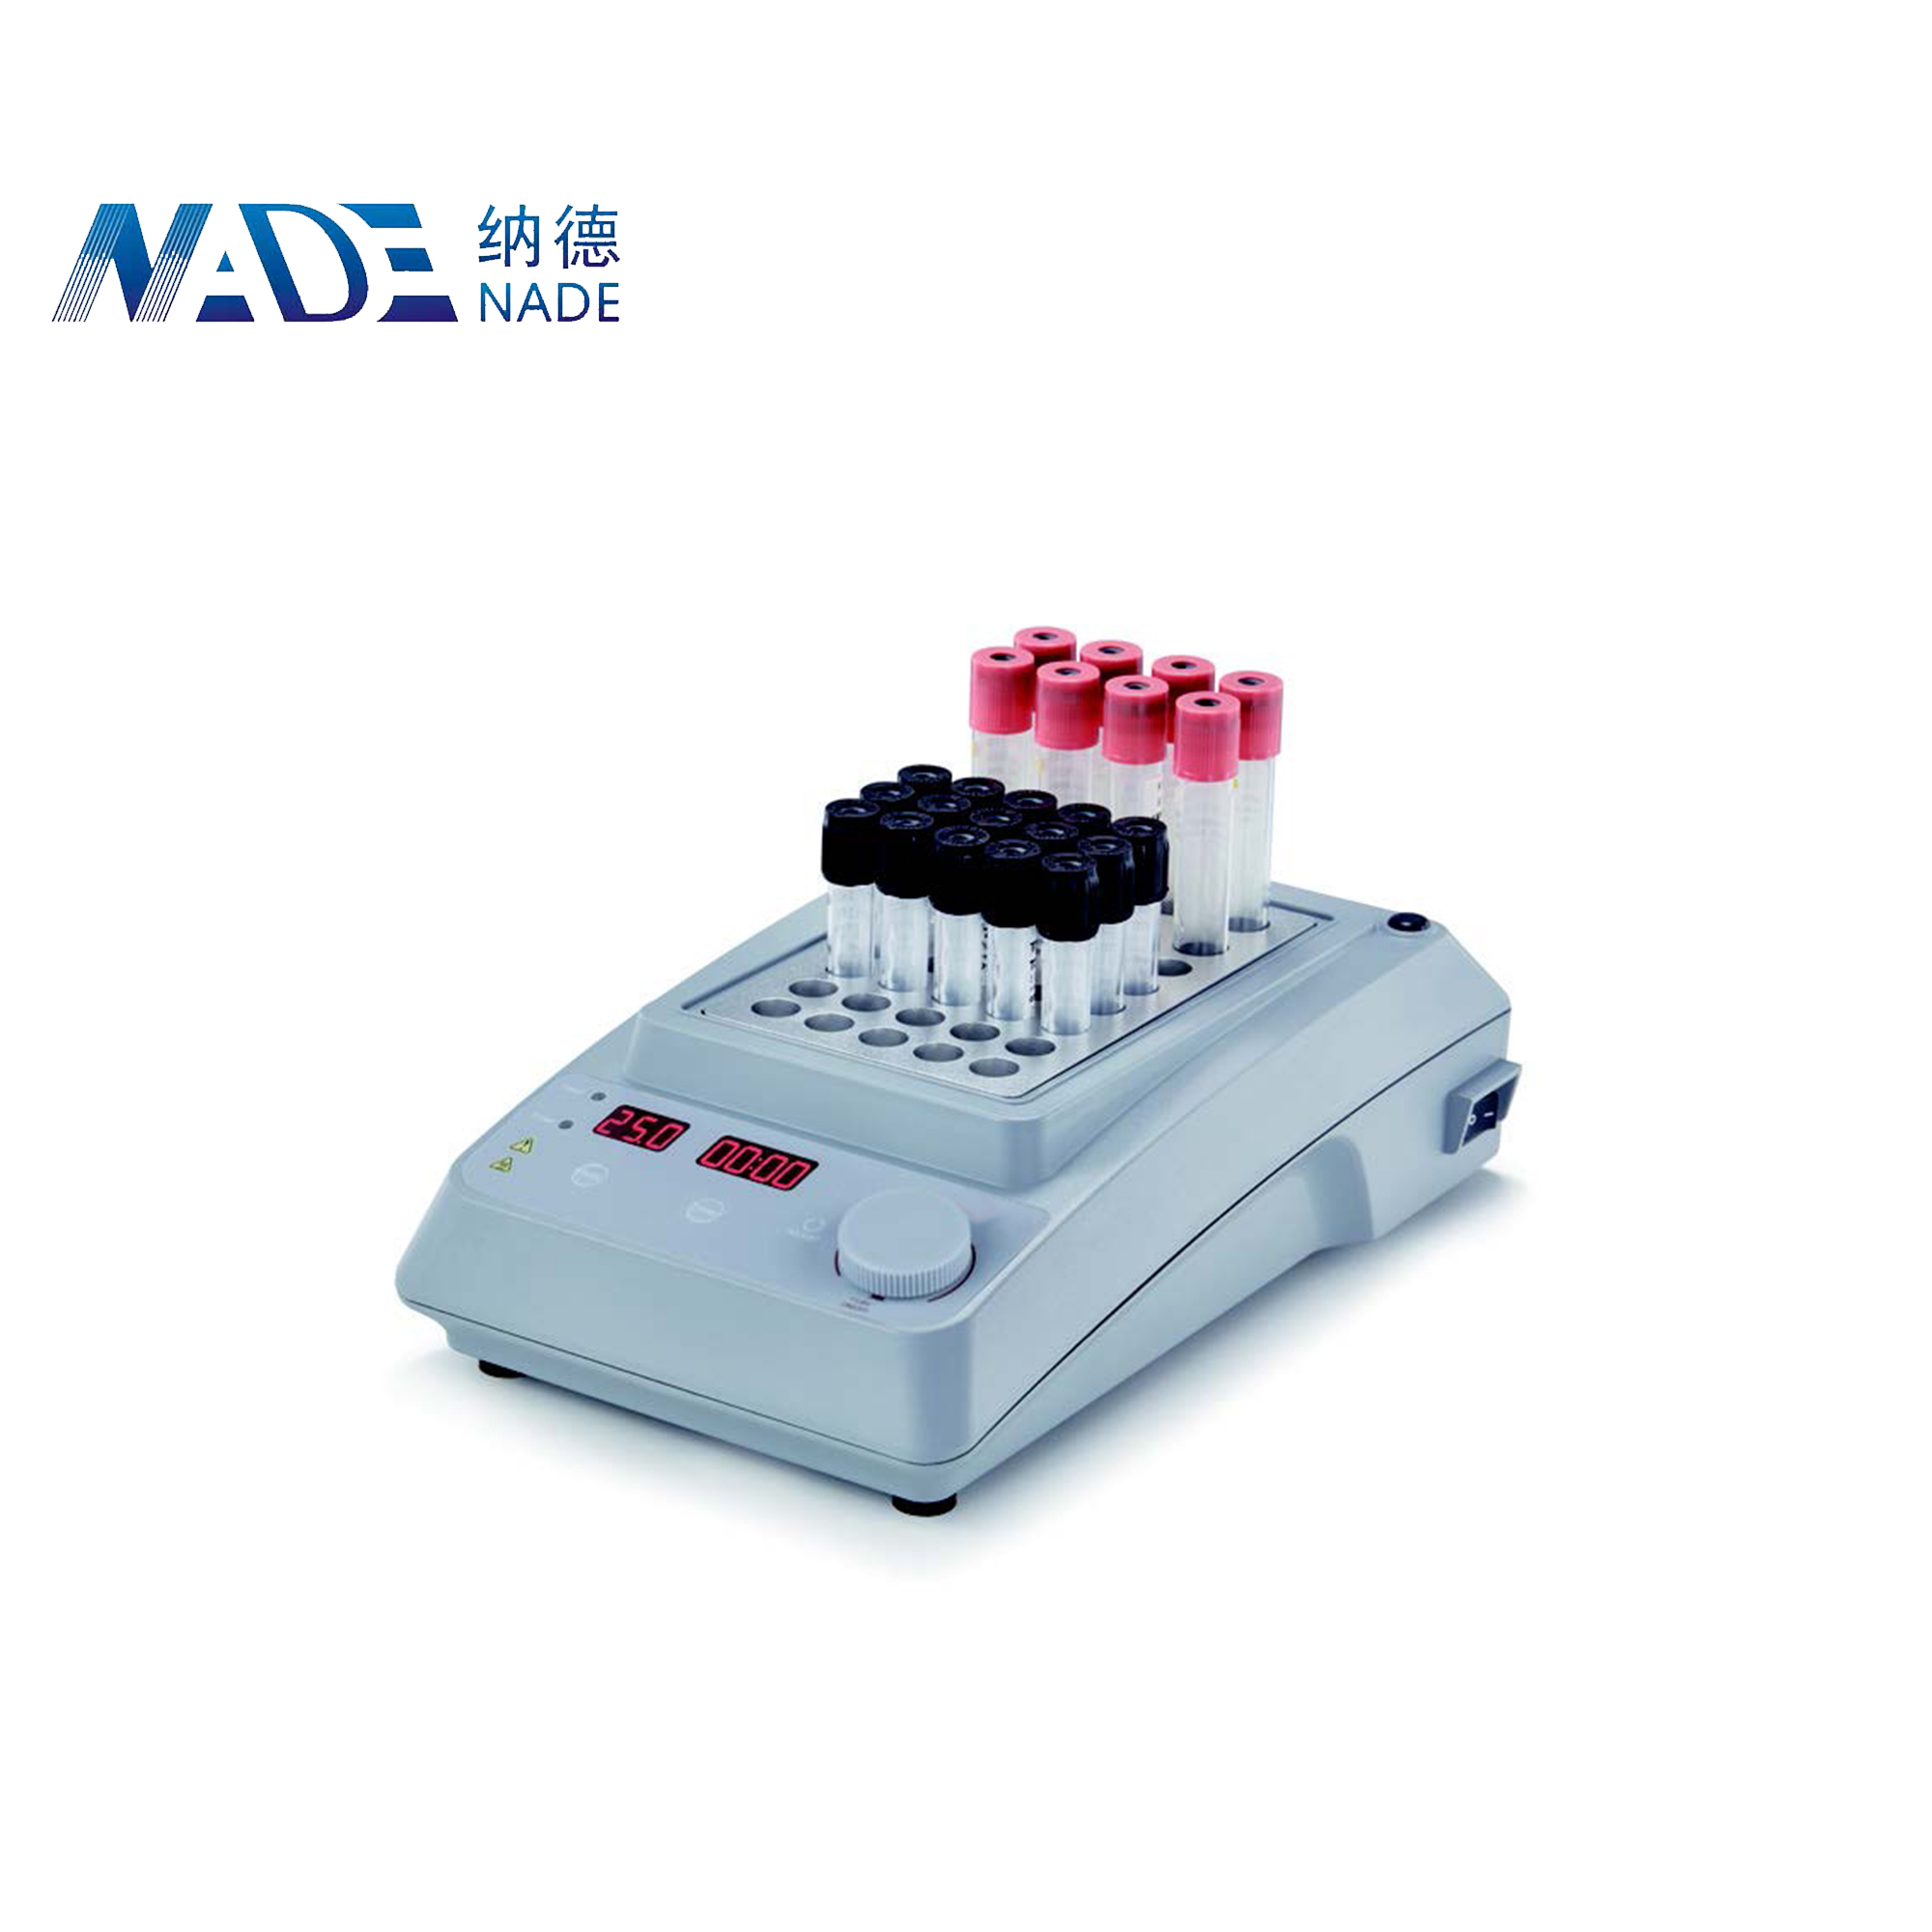 NADE HB60-S LED Digital Heating Block Classic Dry Bath Incubator with dual purpose heating block for clinical laboratories